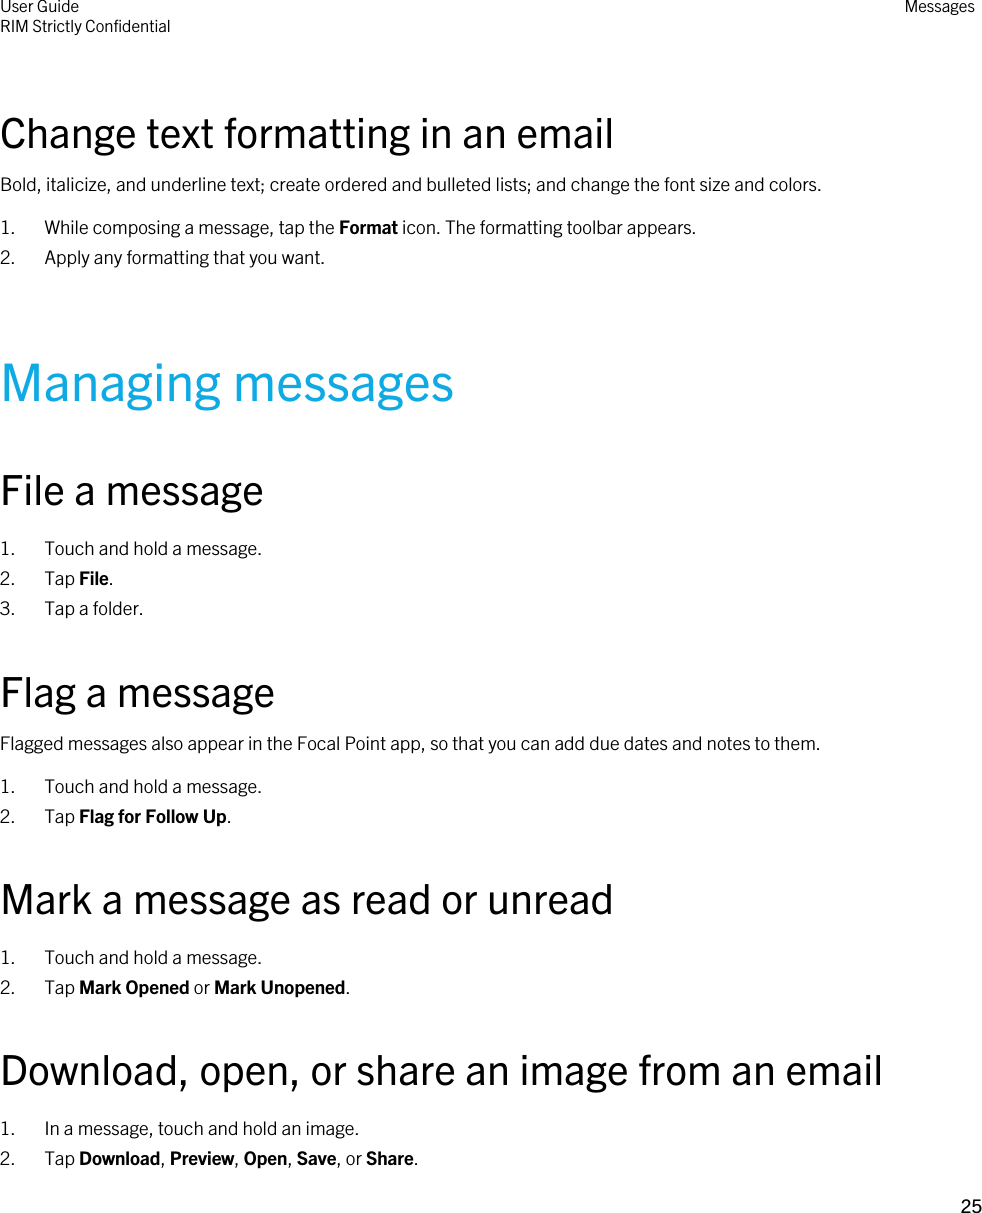 Change text formatting in an emailBold, italicize, and underline text; create ordered and bulleted lists; and change the font size and colors.1. While composing a message, tap the Format icon. The formatting toolbar appears.2. Apply any formatting that you want.Managing messagesFile a message1. Touch and hold a message.2. Tap File.3. Tap a folder.Flag a messageFlagged messages also appear in the Focal Point app, so that you can add due dates and notes to them.1. Touch and hold a message.2. Tap Flag for Follow Up.Mark a message as read or unread1. Touch and hold a message.2. Tap Mark Opened or Mark Unopened.Download, open, or share an image from an email1. In a message, touch and hold an image.2. Tap Download, Preview, Open, Save, or Share.User GuideRIM Strictly Confidential Messages25 